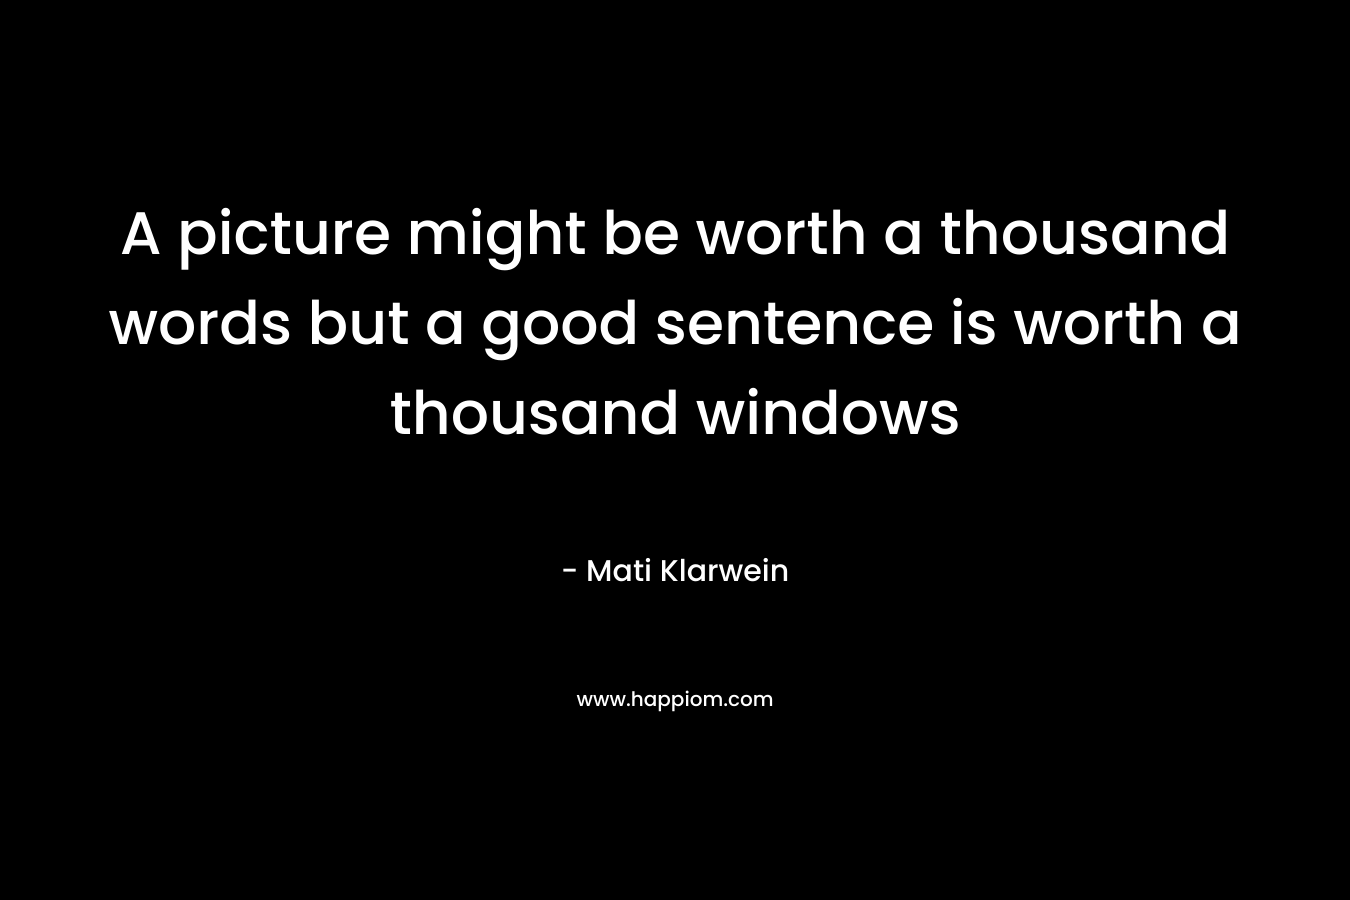 A picture might be worth a thousand words but a good sentence is worth a thousand windows